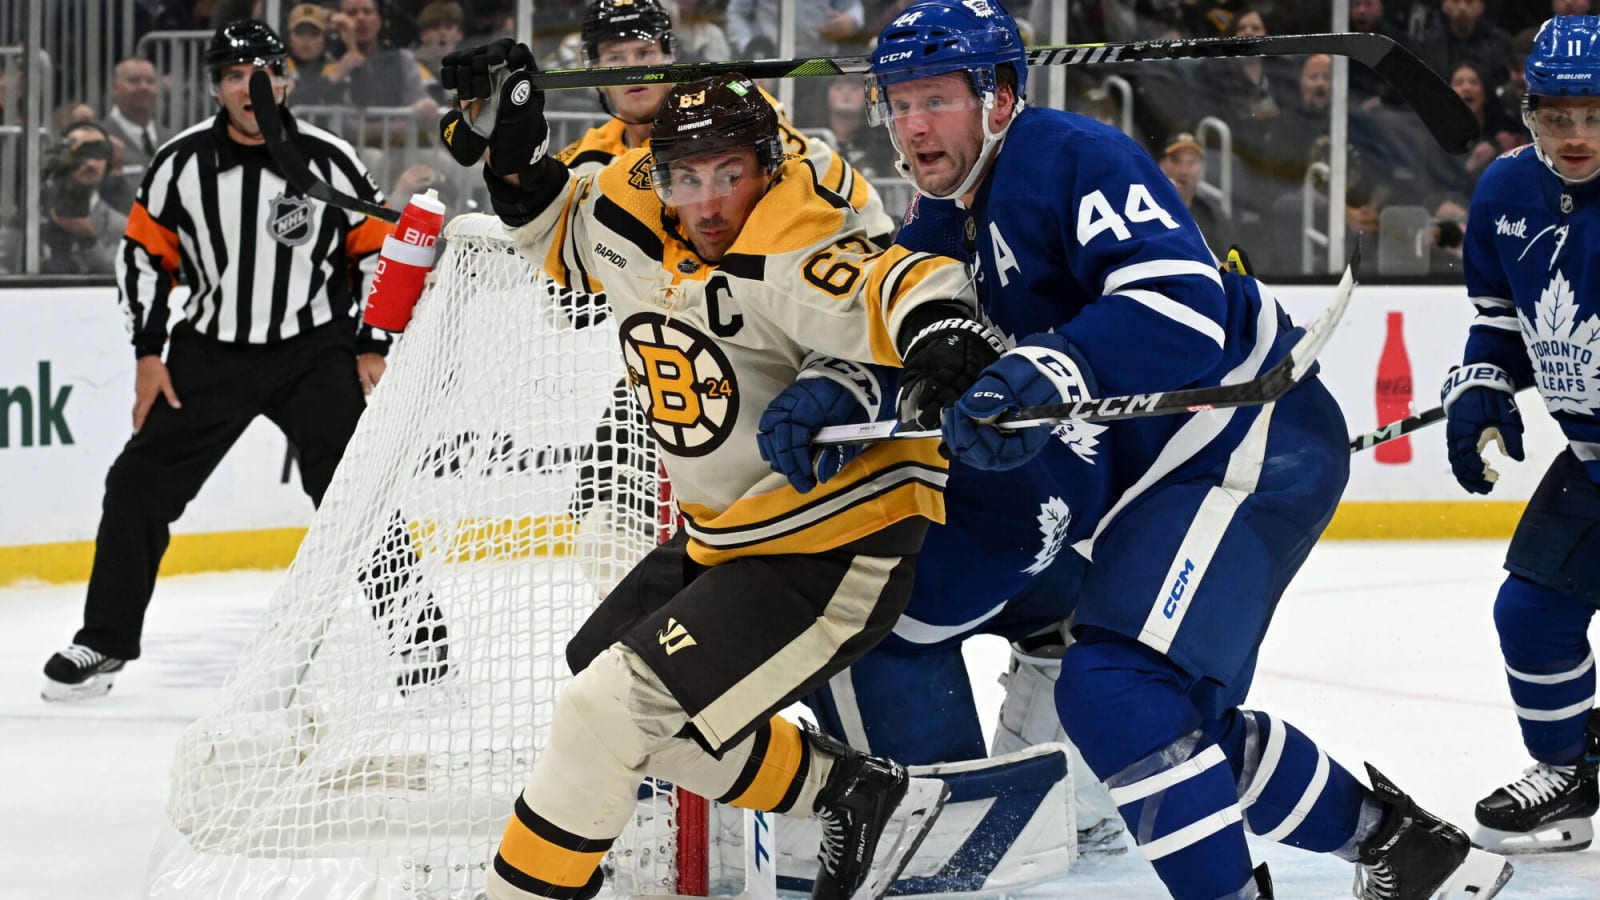 Maple Leafs vs Bruins game 3 starting lineups and other notes